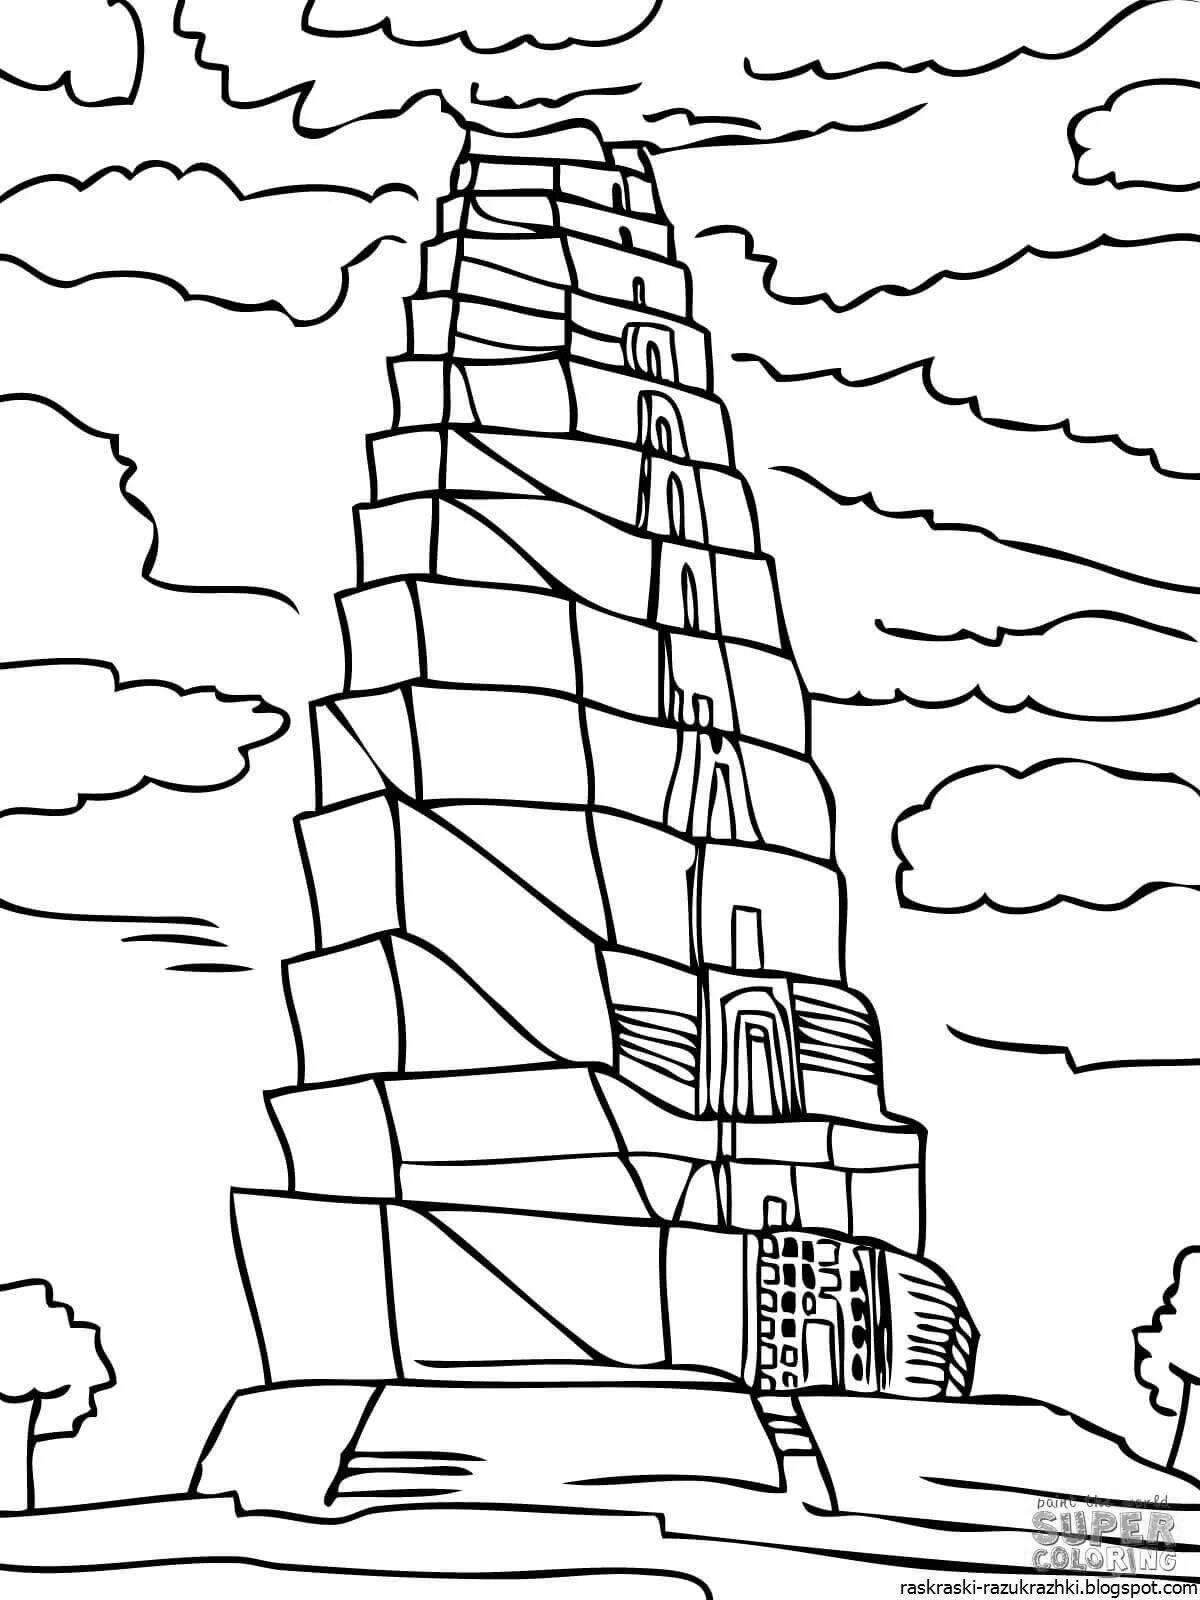 Shiny Tower of Babel for kids